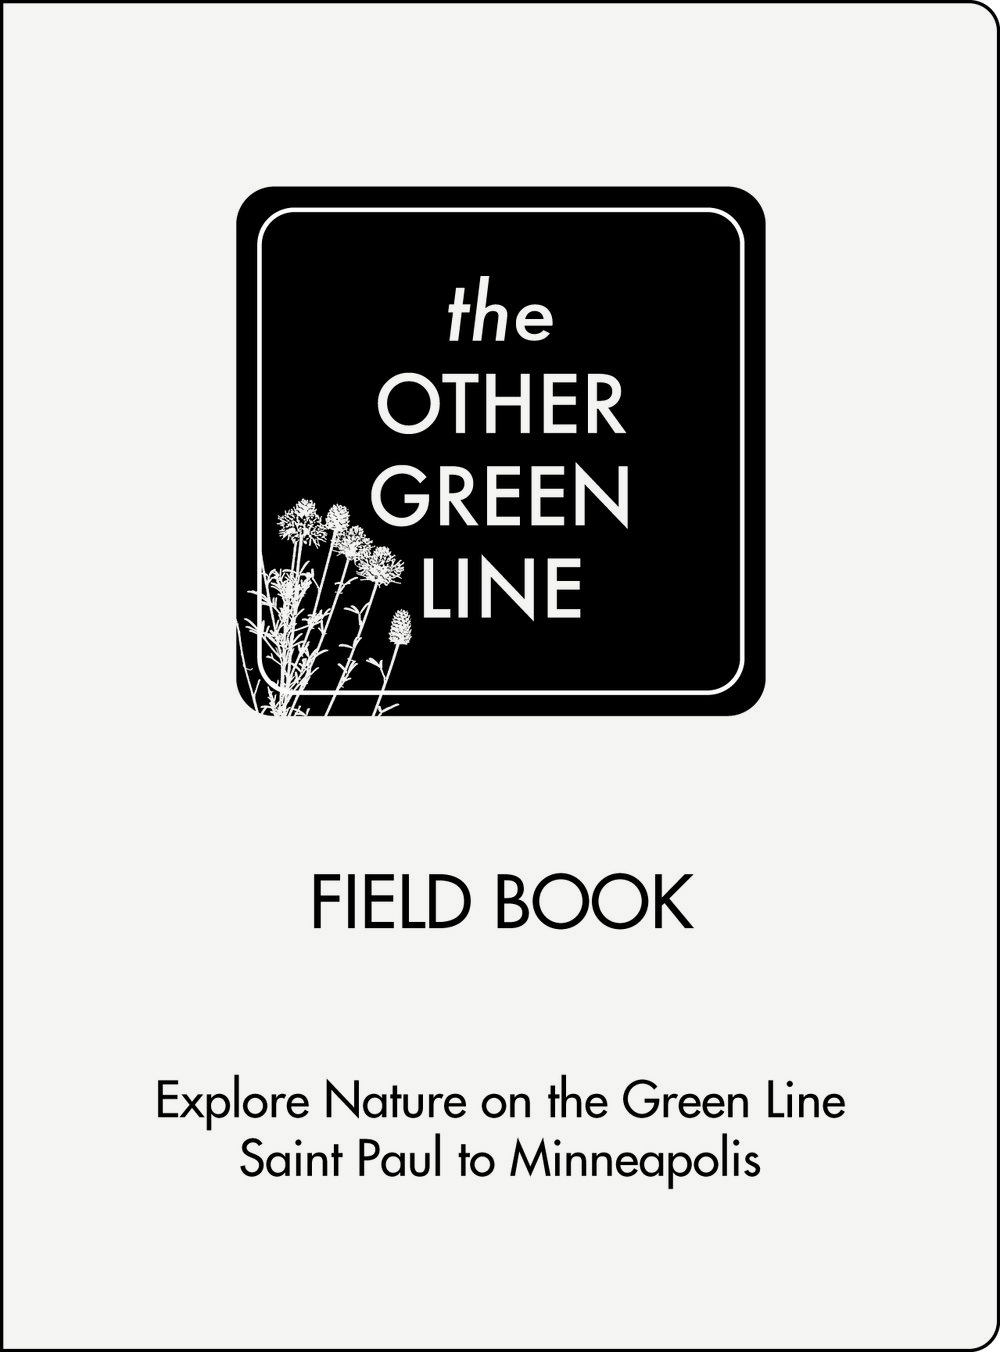  -8 itineraries with associated maps and blank recording pages for self-guided nature forays -distributed free through local businesses -download:  PDF of Field Book  